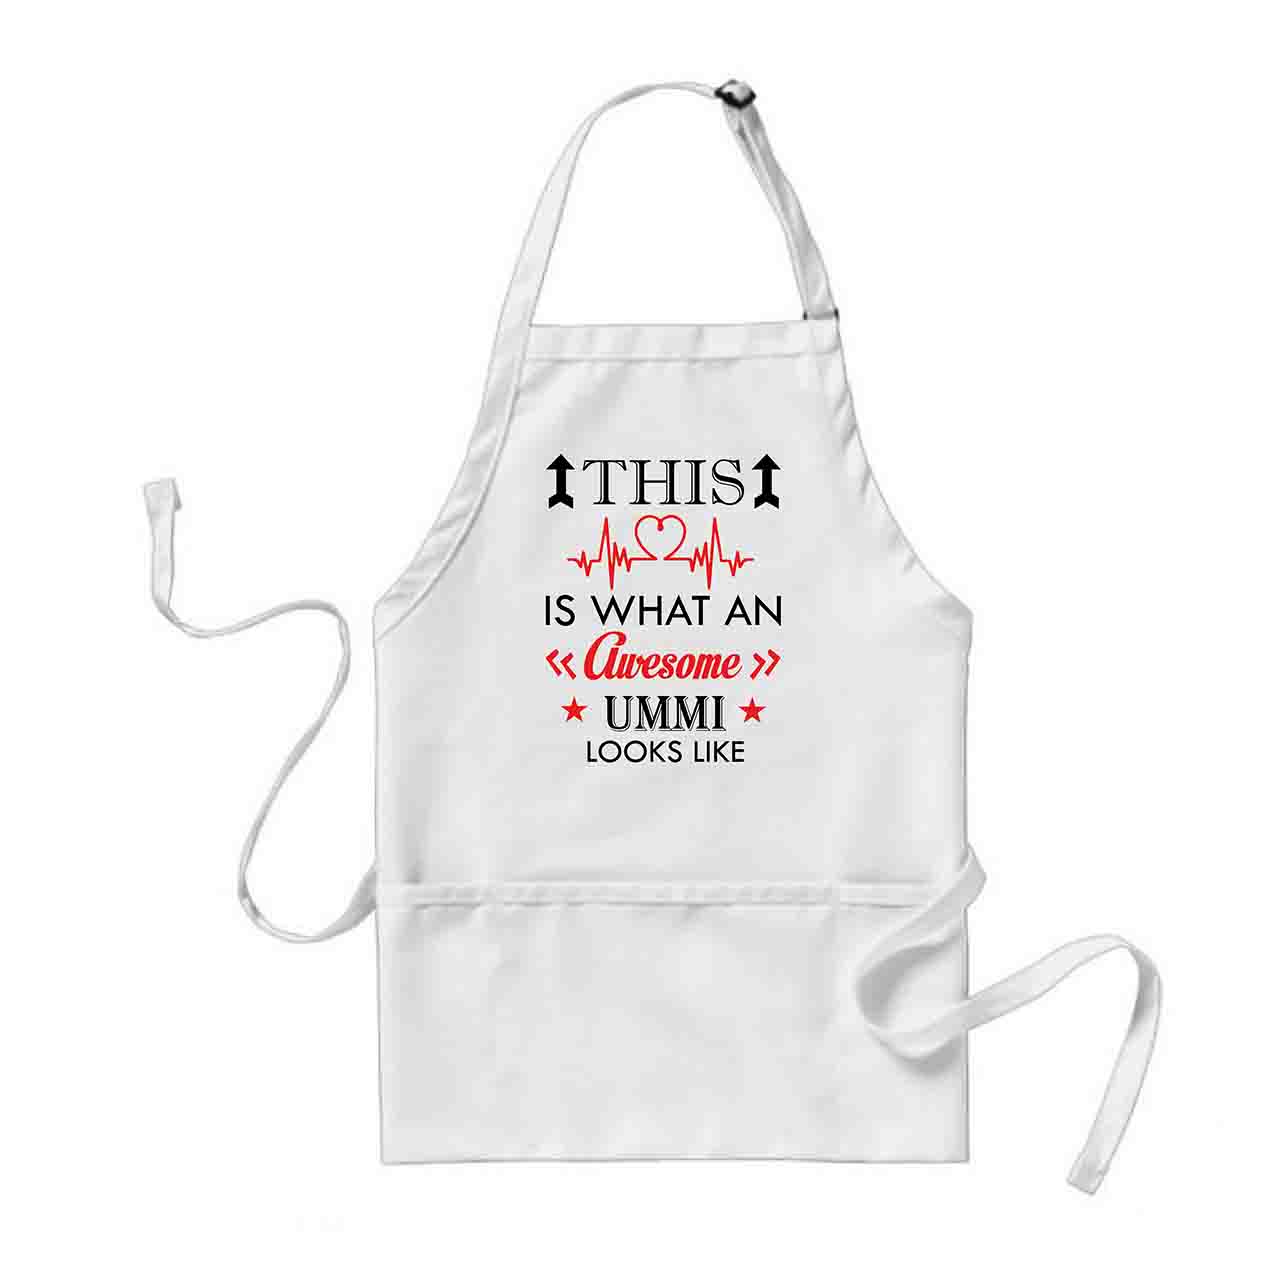 PERSONALIZED APRON GIFT FOR MOM ON MOTHER’S DAY (Design 3)